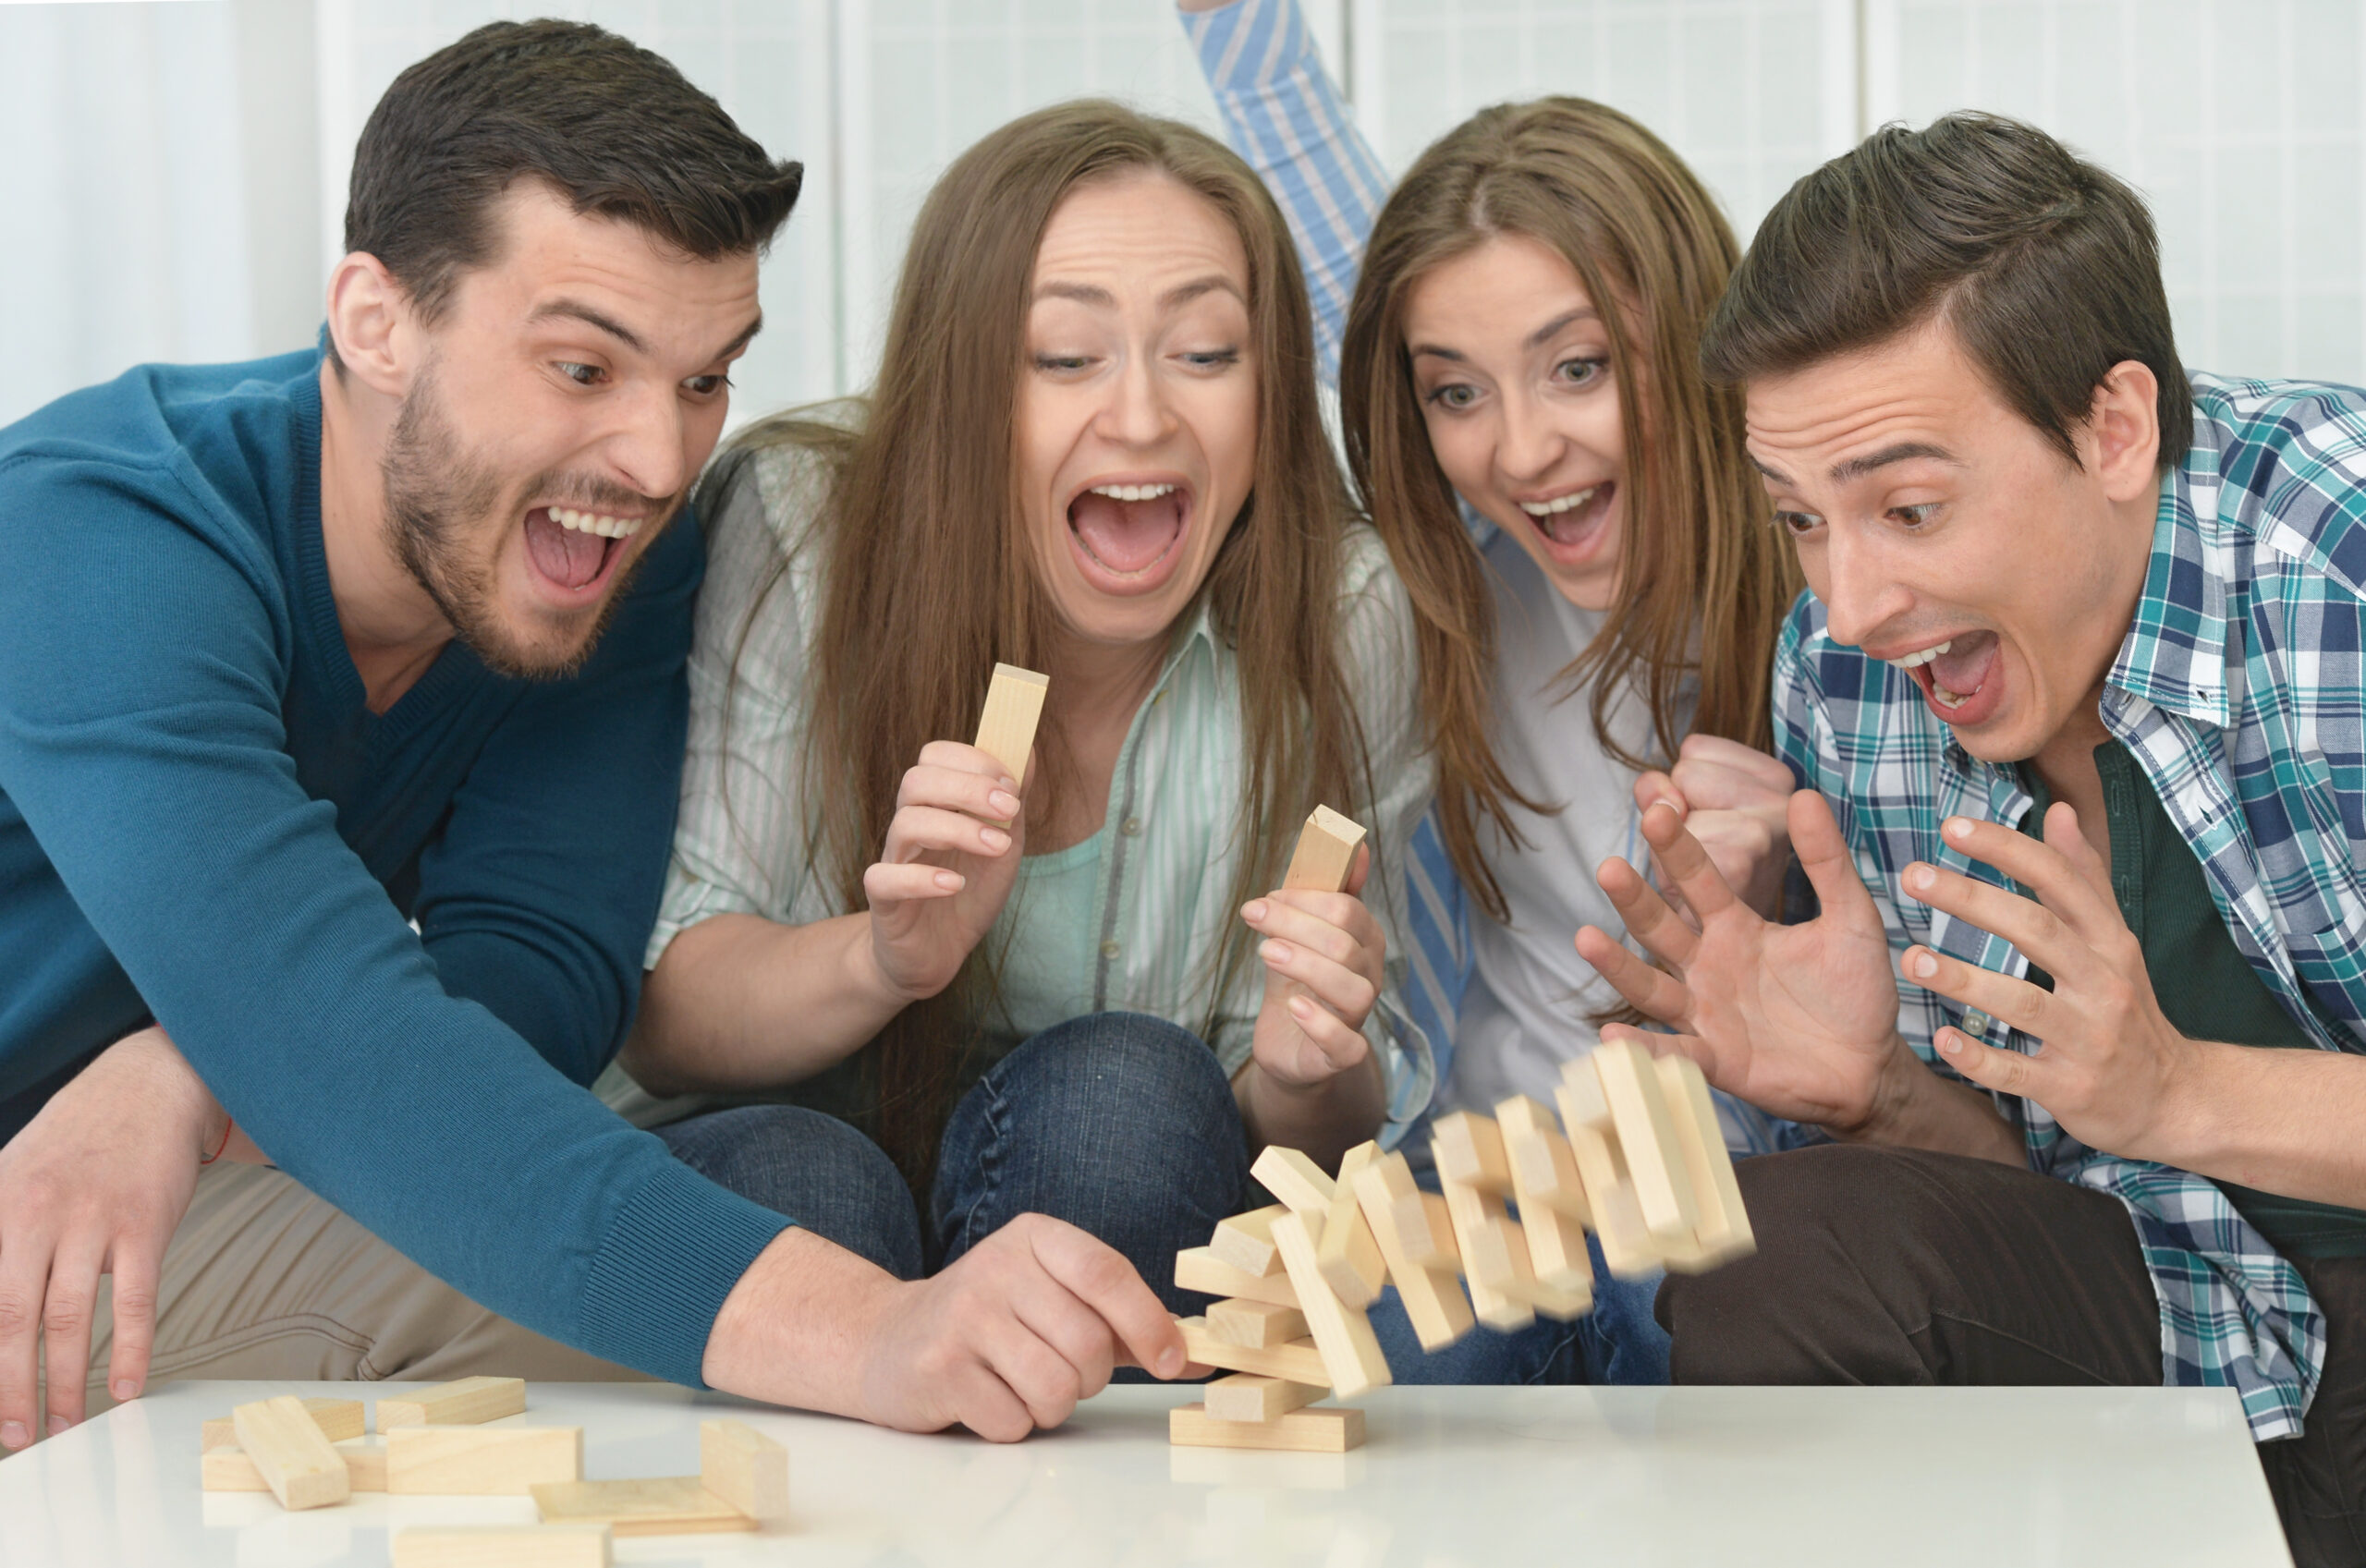 Gamification at the workplace using Jenga